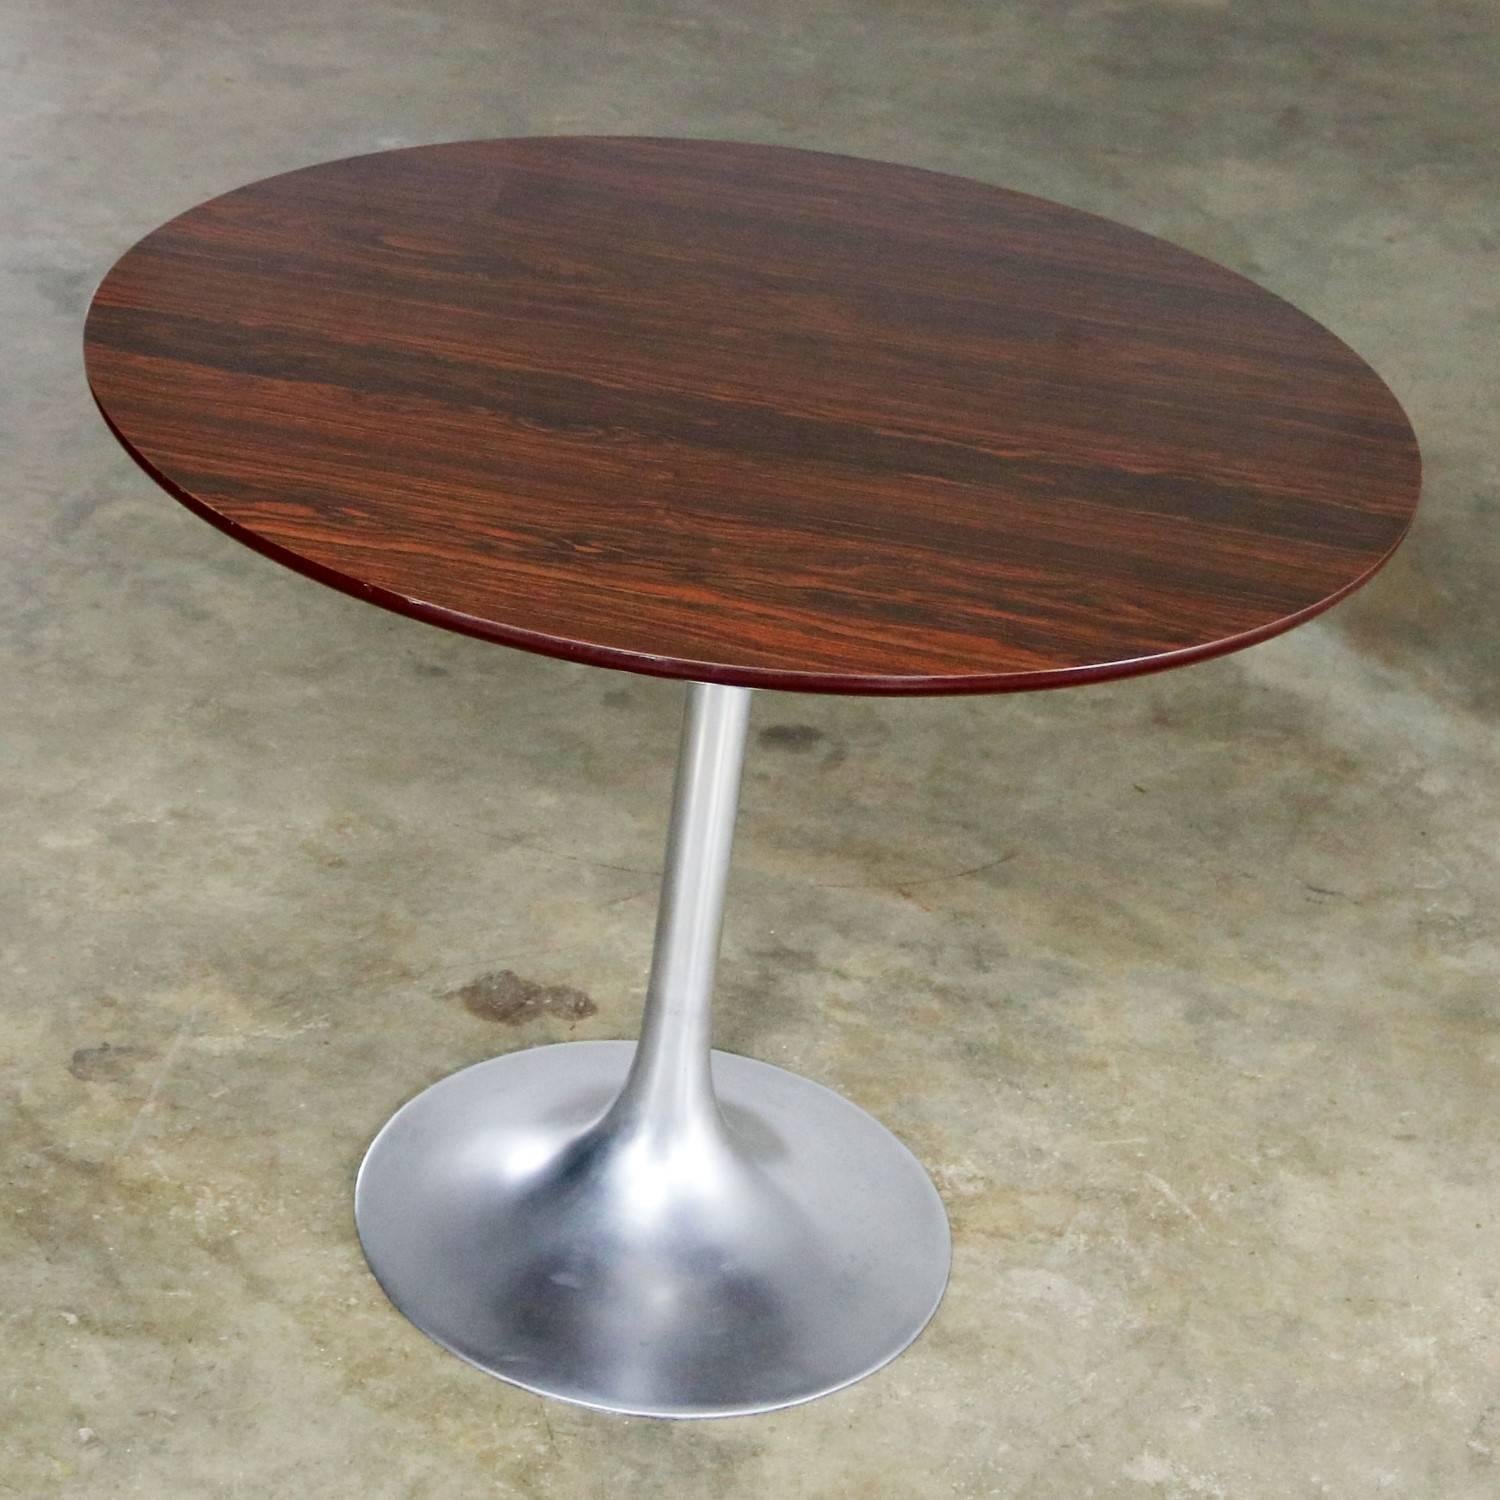 Classic Mid-Century Modern Saarinen style tulip table with polished aluminum base and round wood grain laminate top. Possibly Burke. In wonderful restored condition, circa 1960s.

Handsome and totally Classic Mid-Century Modern design. That is how